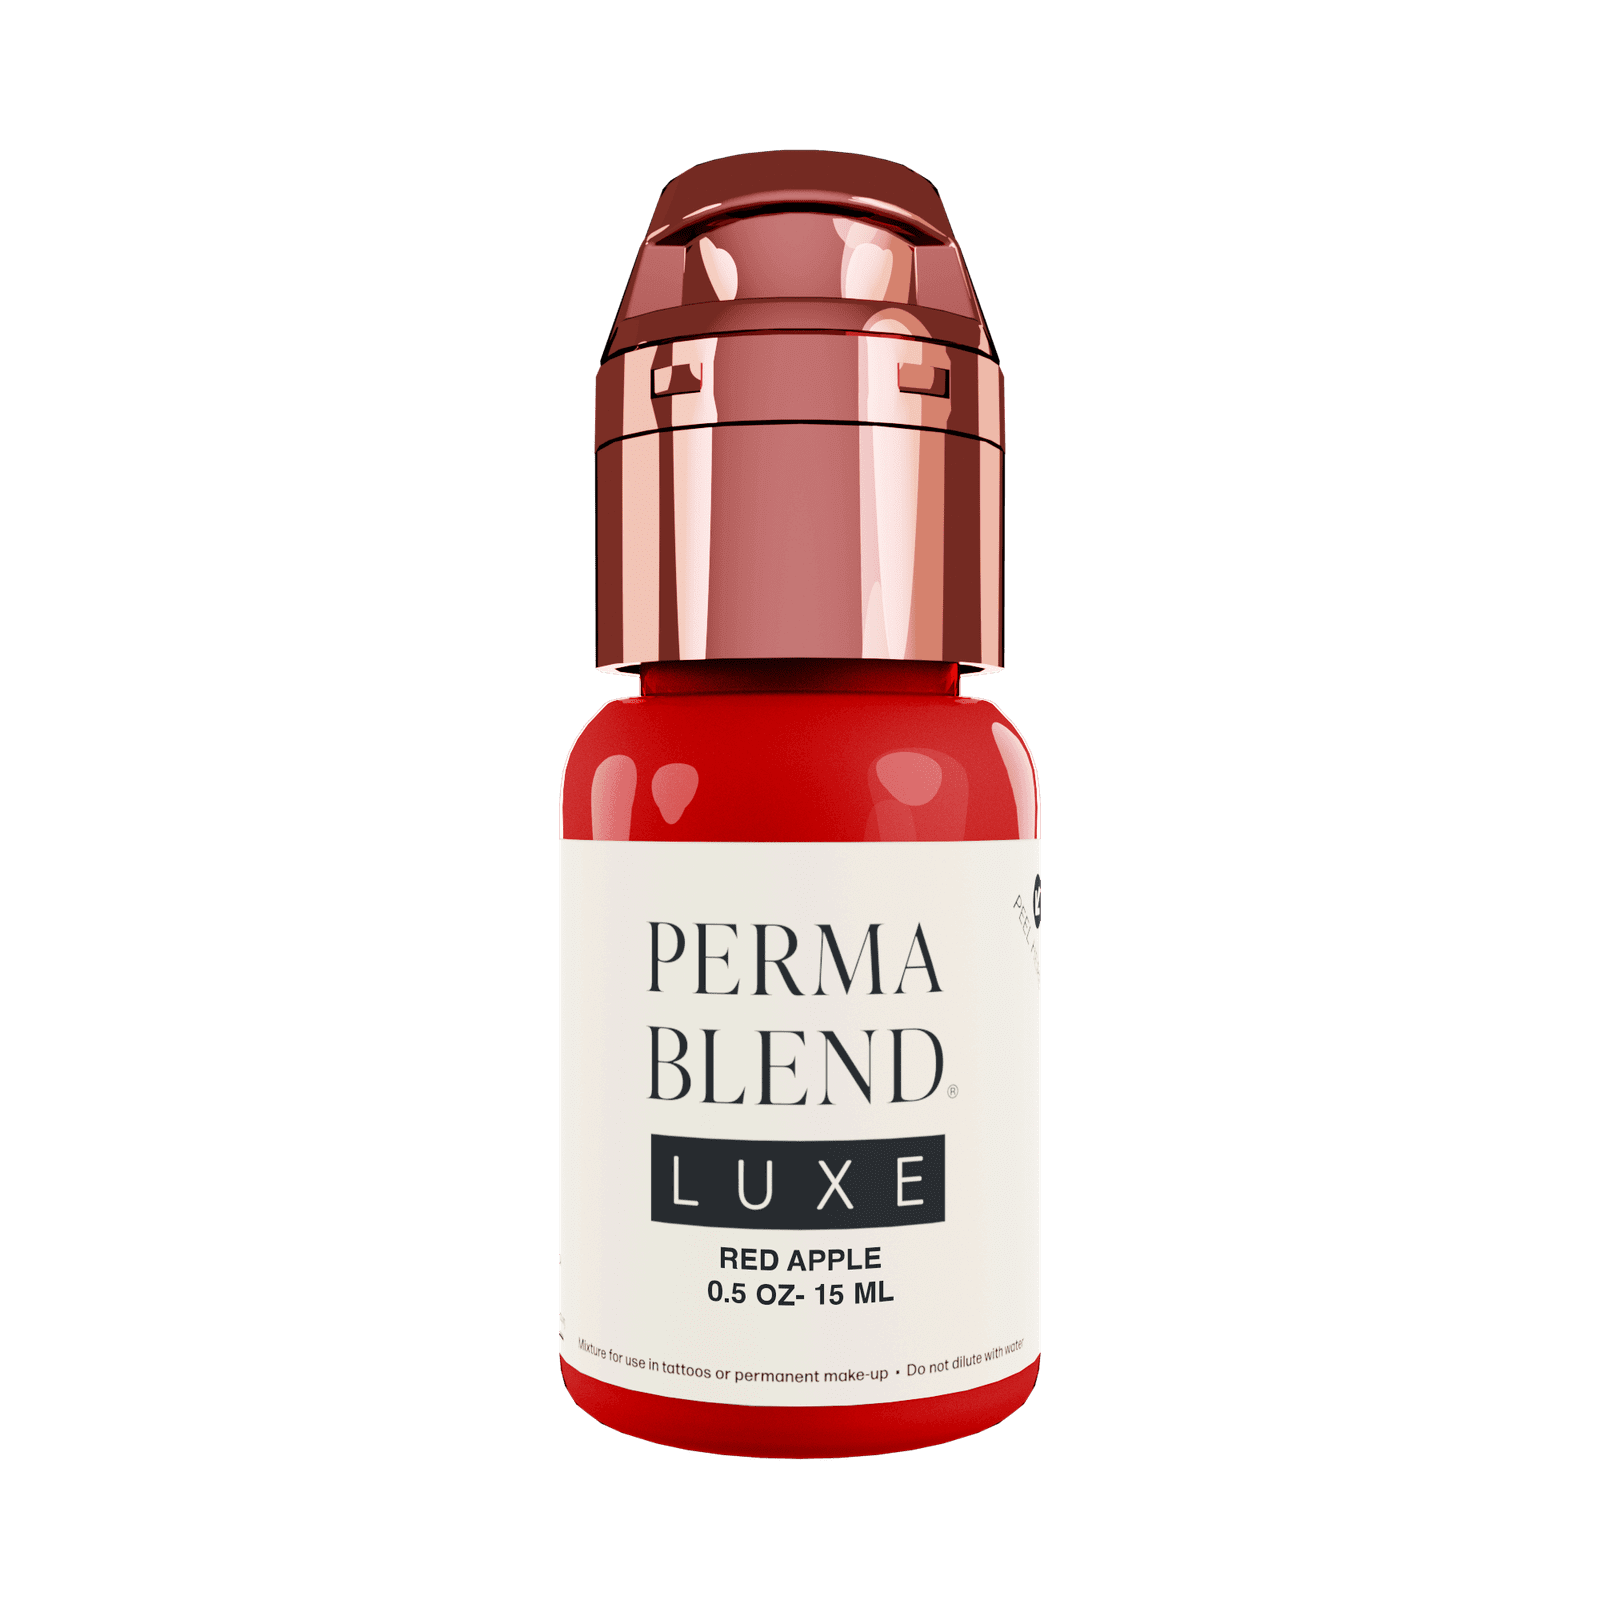 Perma Blend Luxe Red Apple